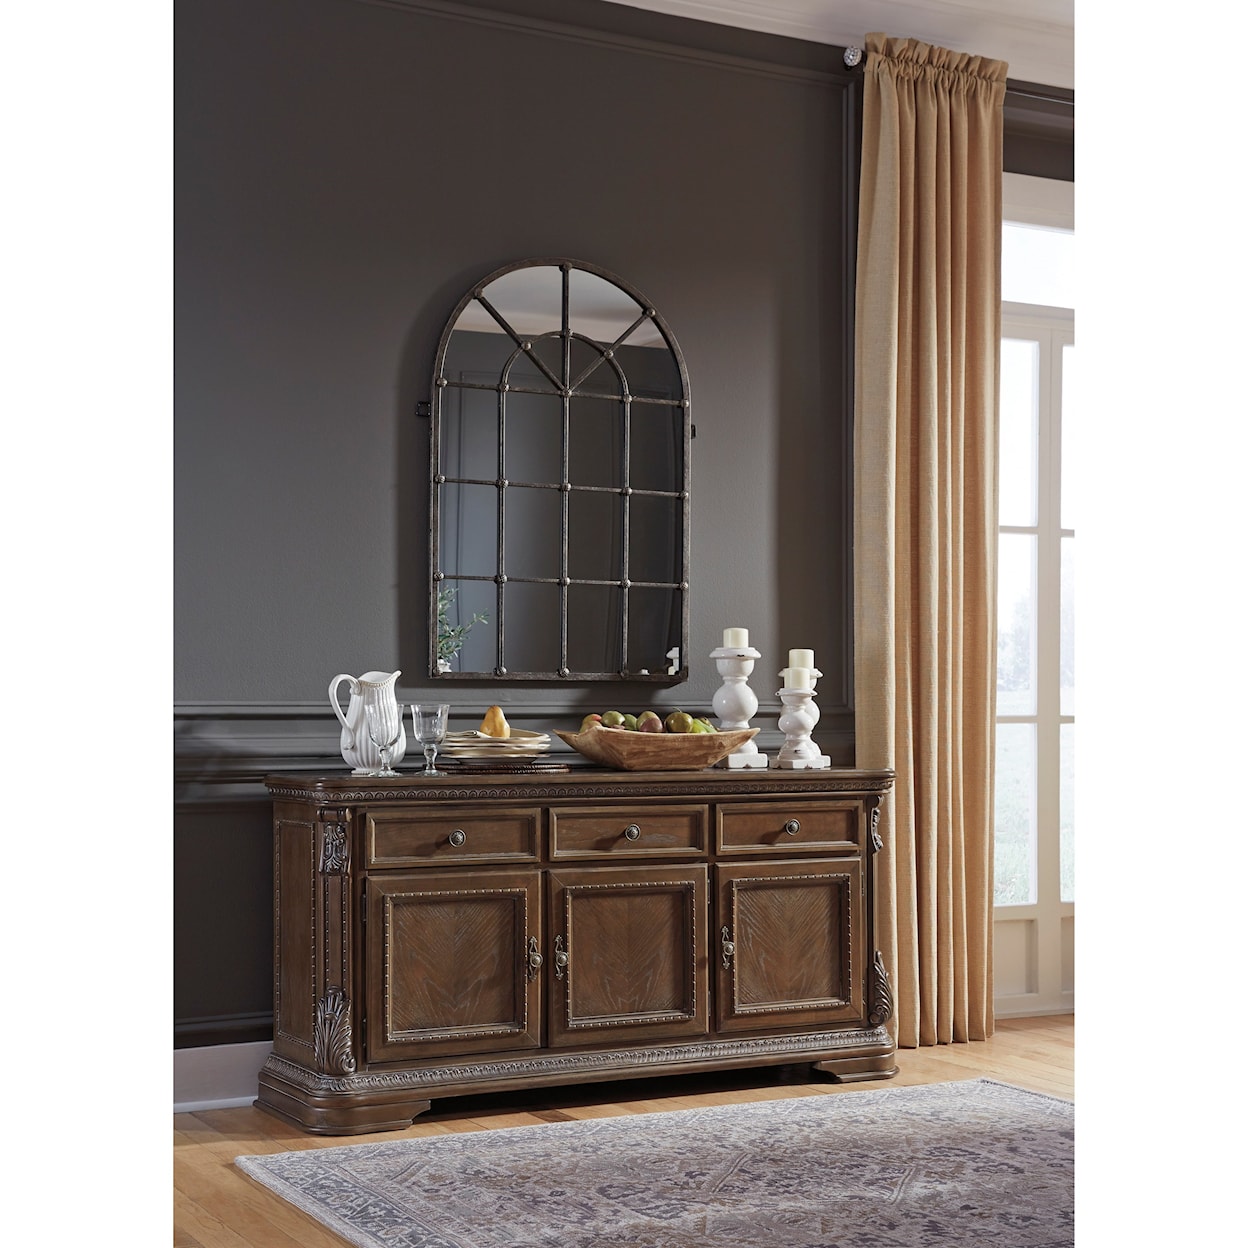 Signature Design by Ashley Furniture Charmond Dining Room Buffet